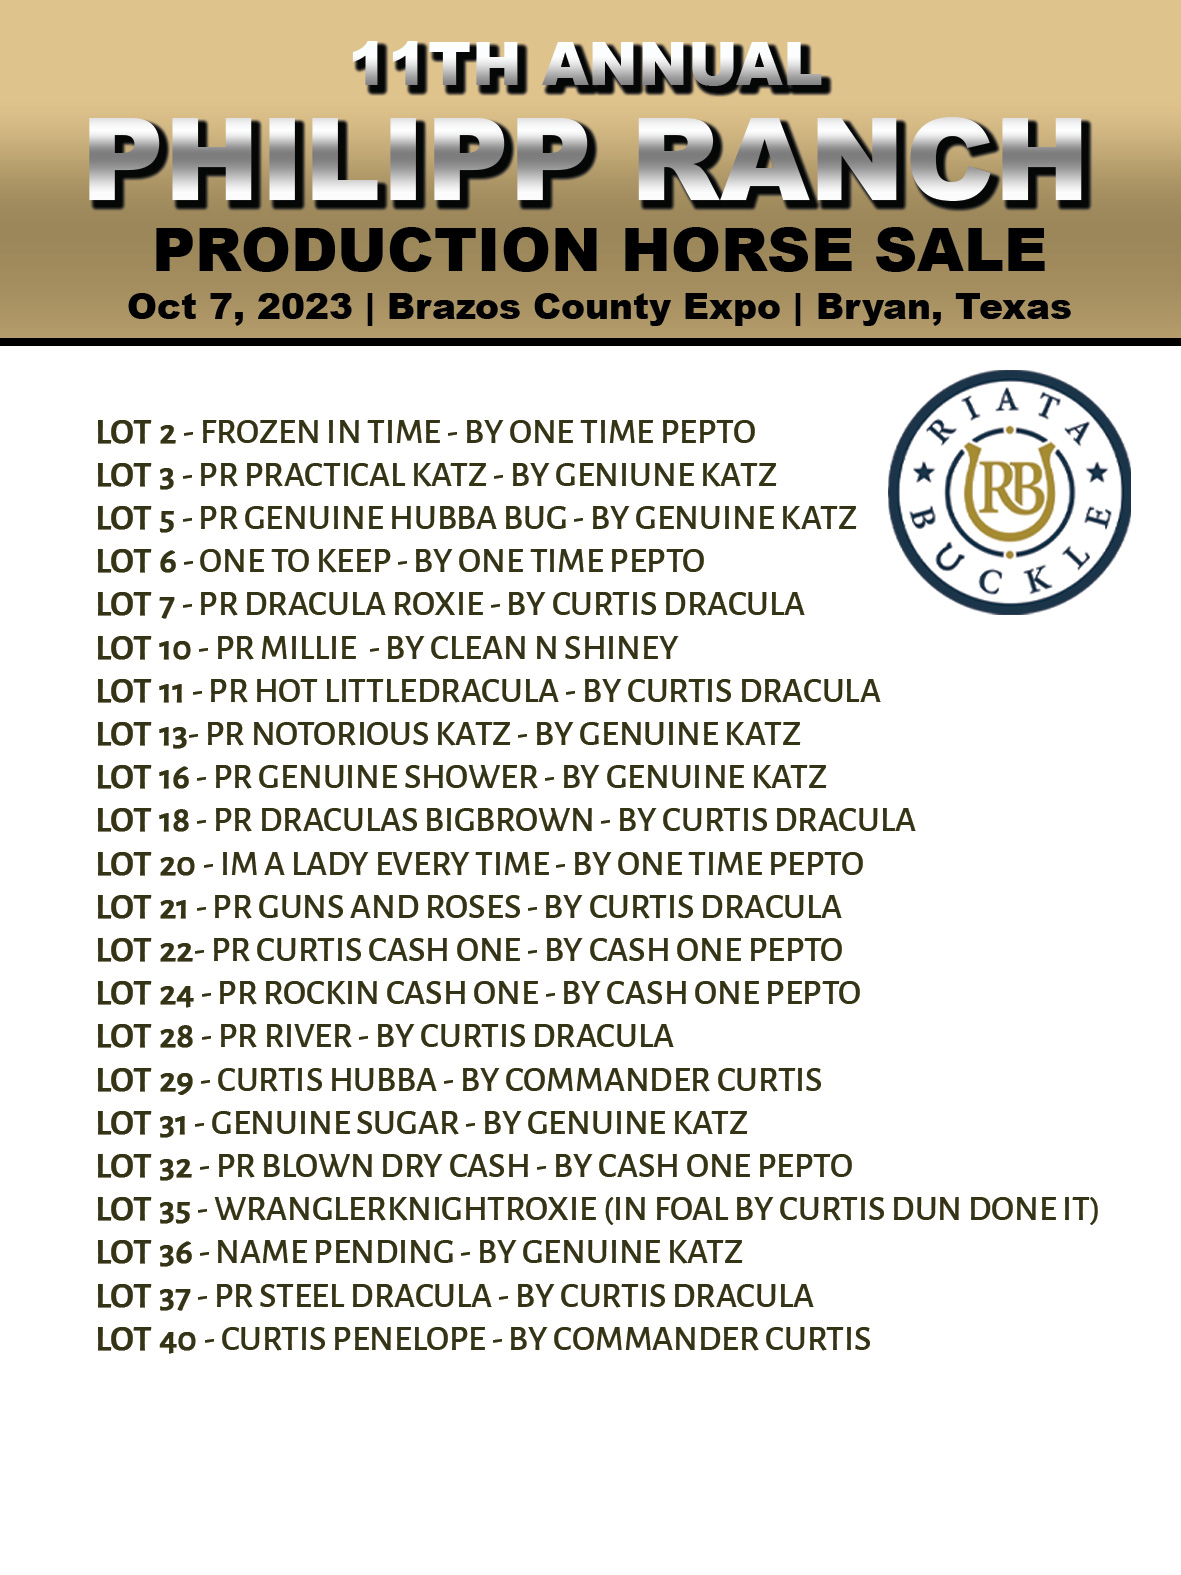 Event Ad for Philipp Ranch Production Sale